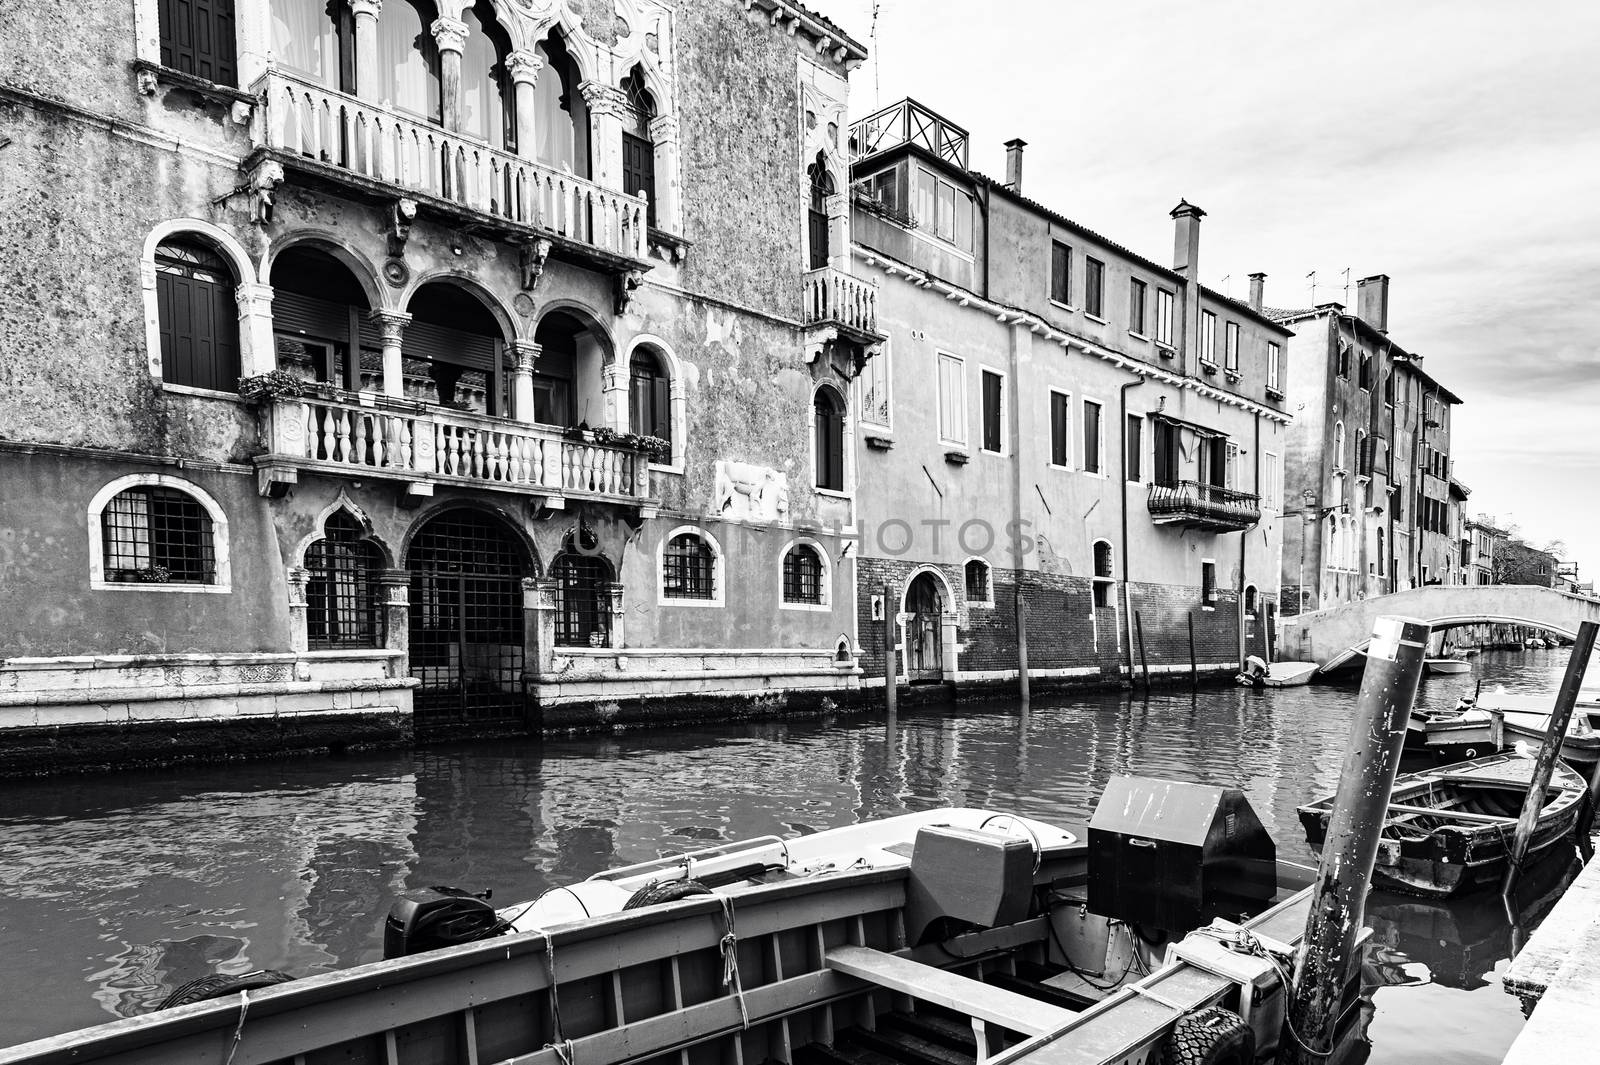 Deserted Venice in black and white. Museum City is situated across a group of islands that are separated by canals and linked by empty bridges.  